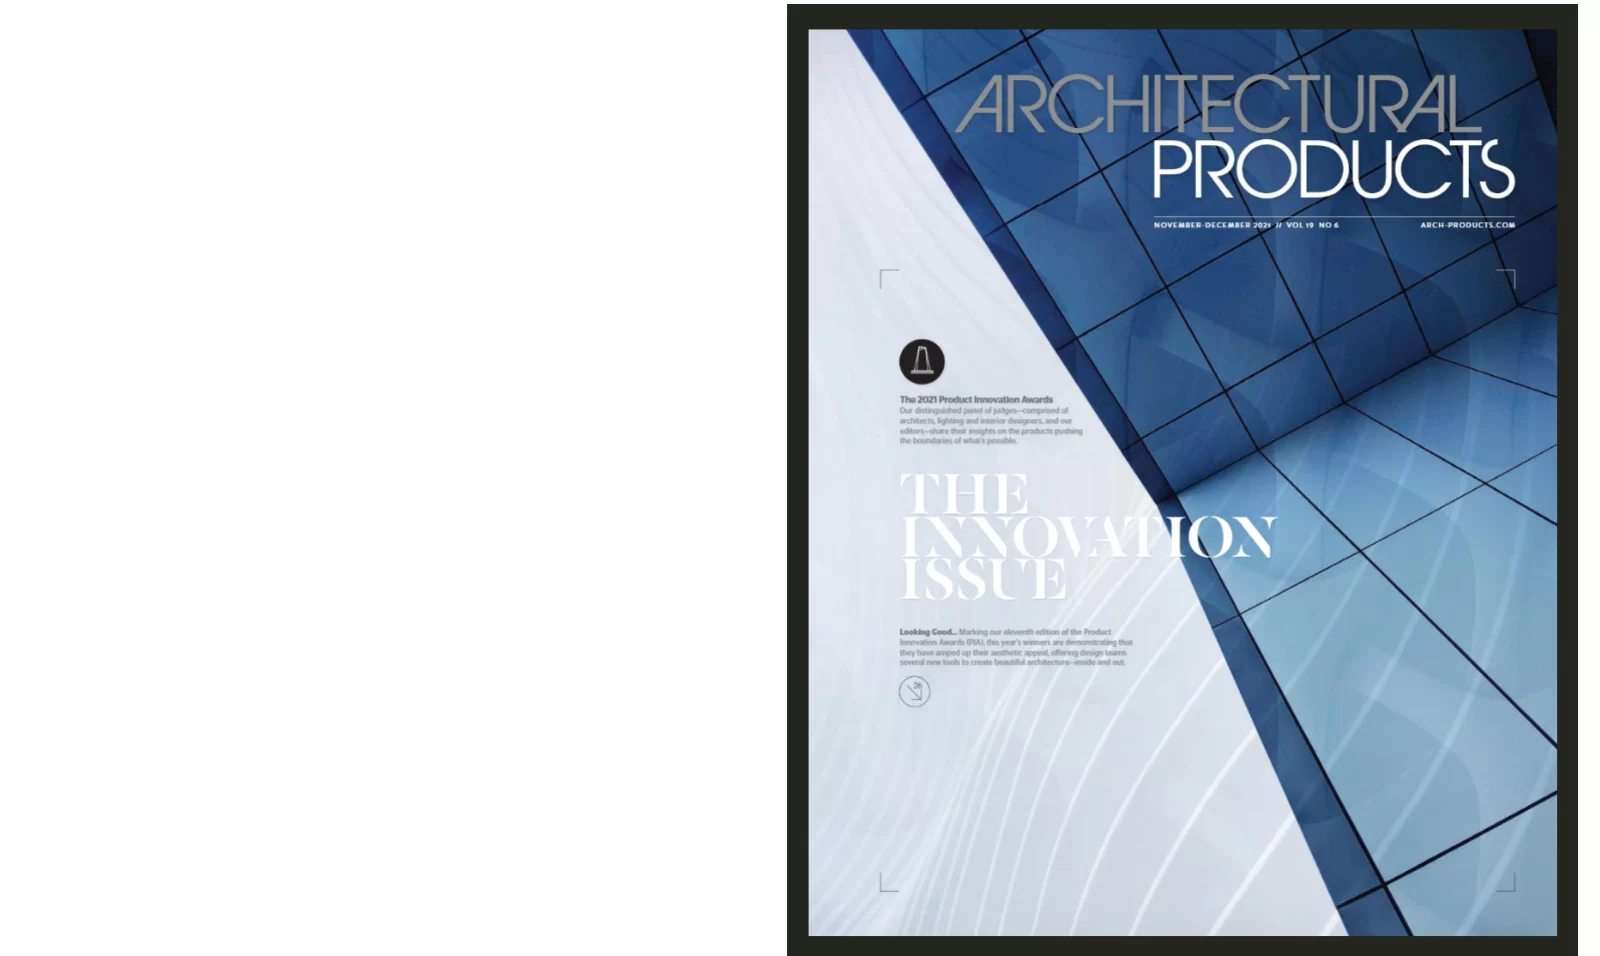 Accoya Wood featured in Architectural Products Magazine 